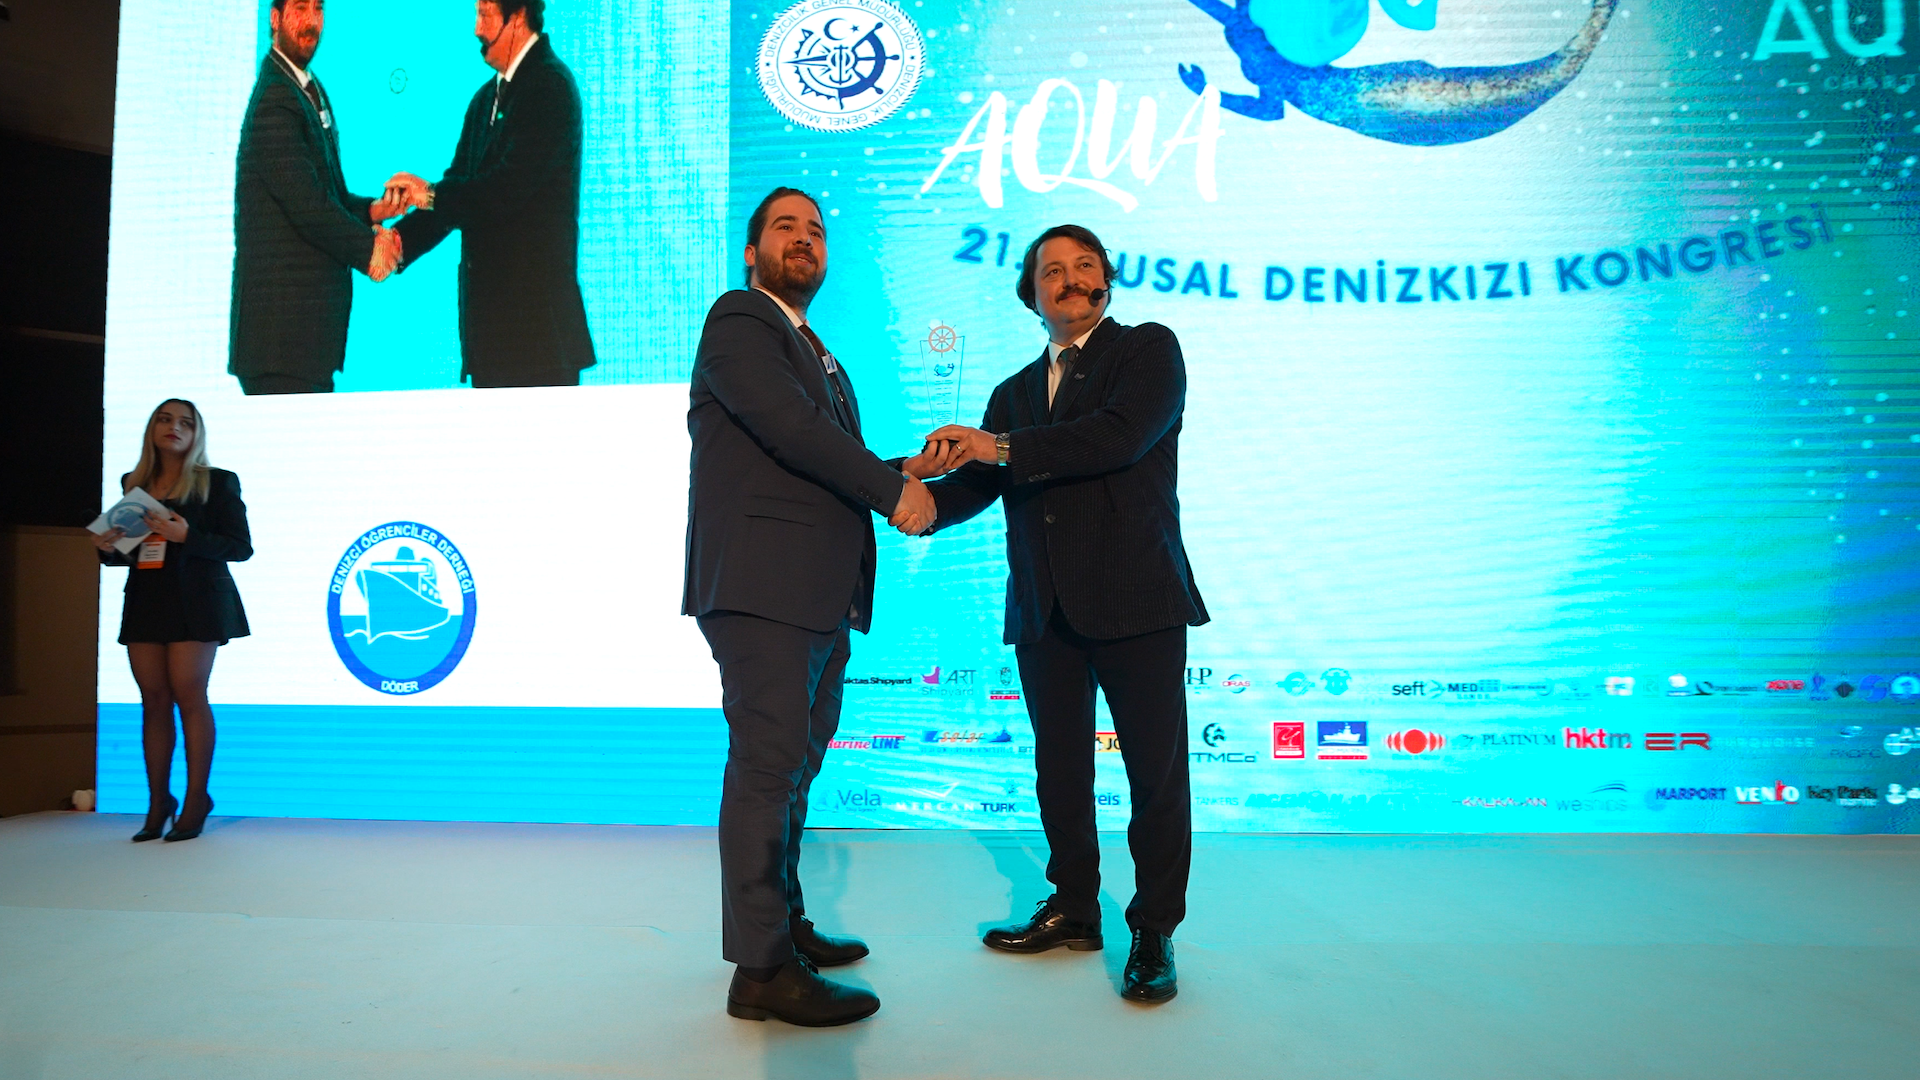 21st National Mermaid Congress, Yachting Tourism Conference